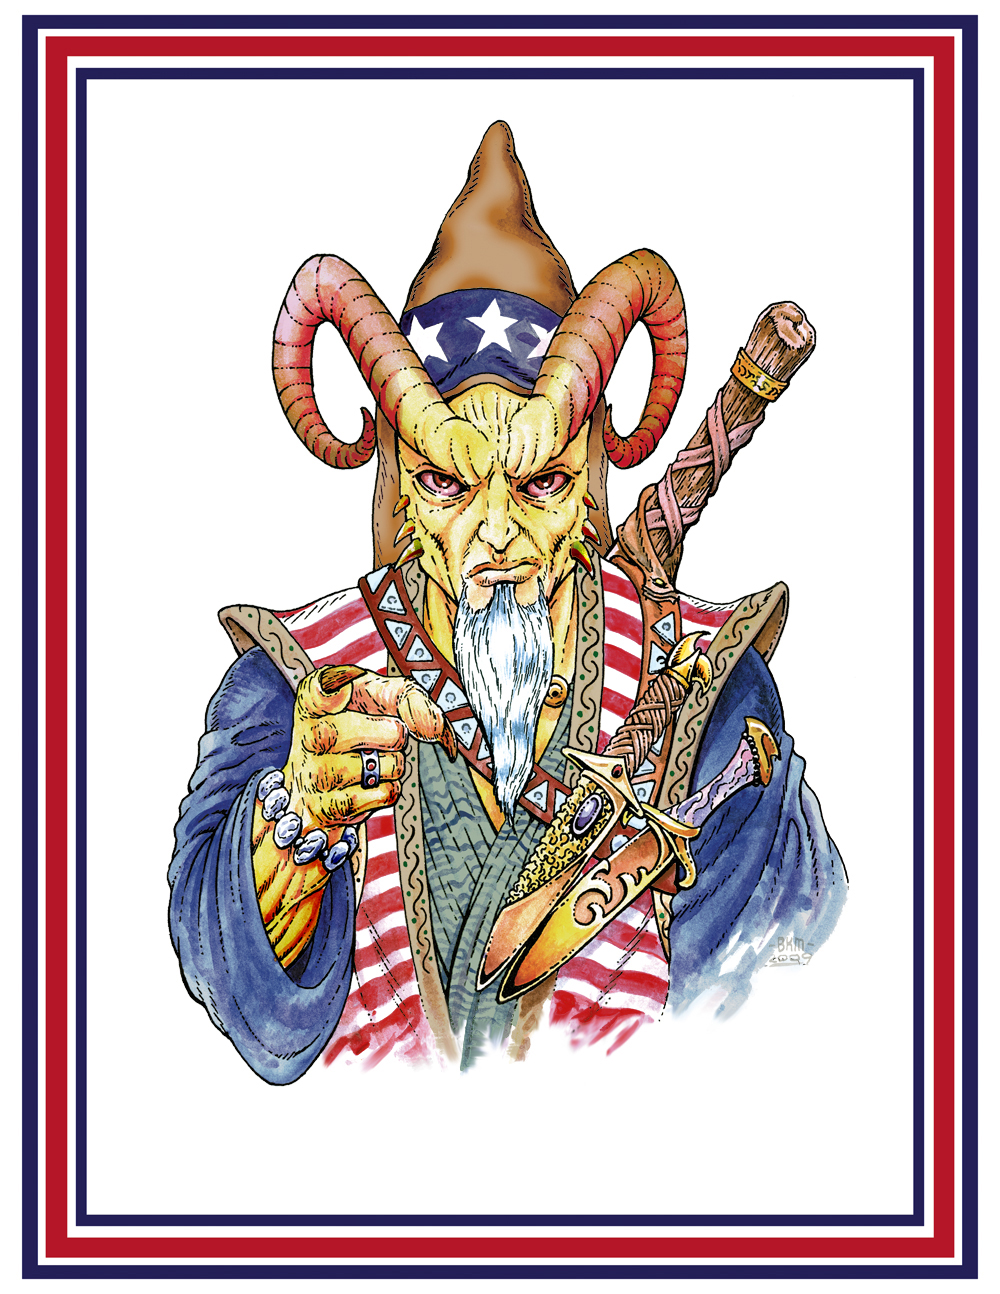 Happy-4th-July-from-Goodman-Games